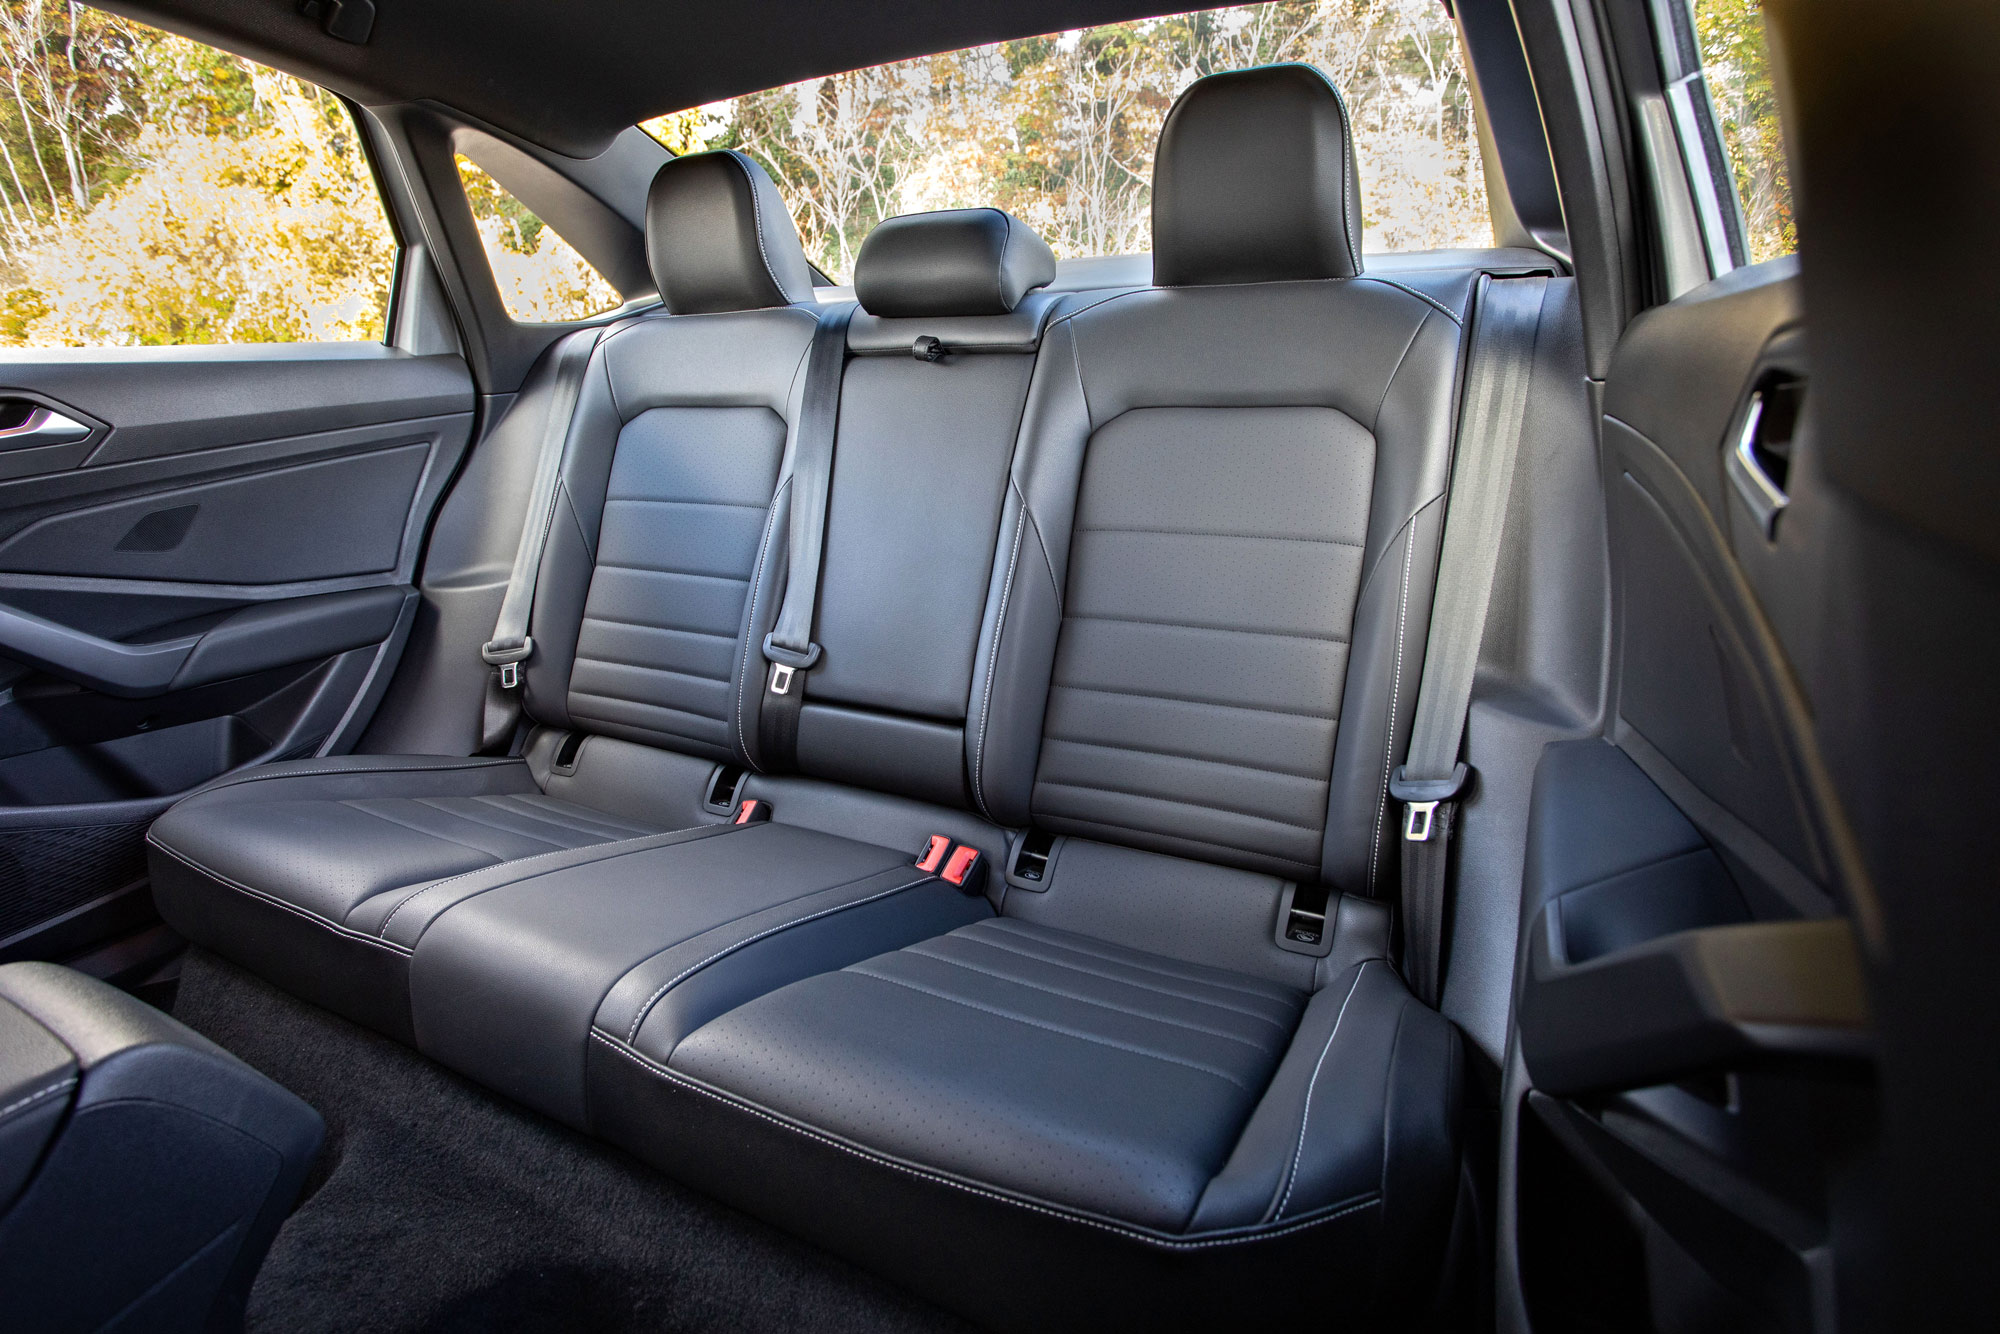 2022 Volkswagen Jetta leather back seats with forest view